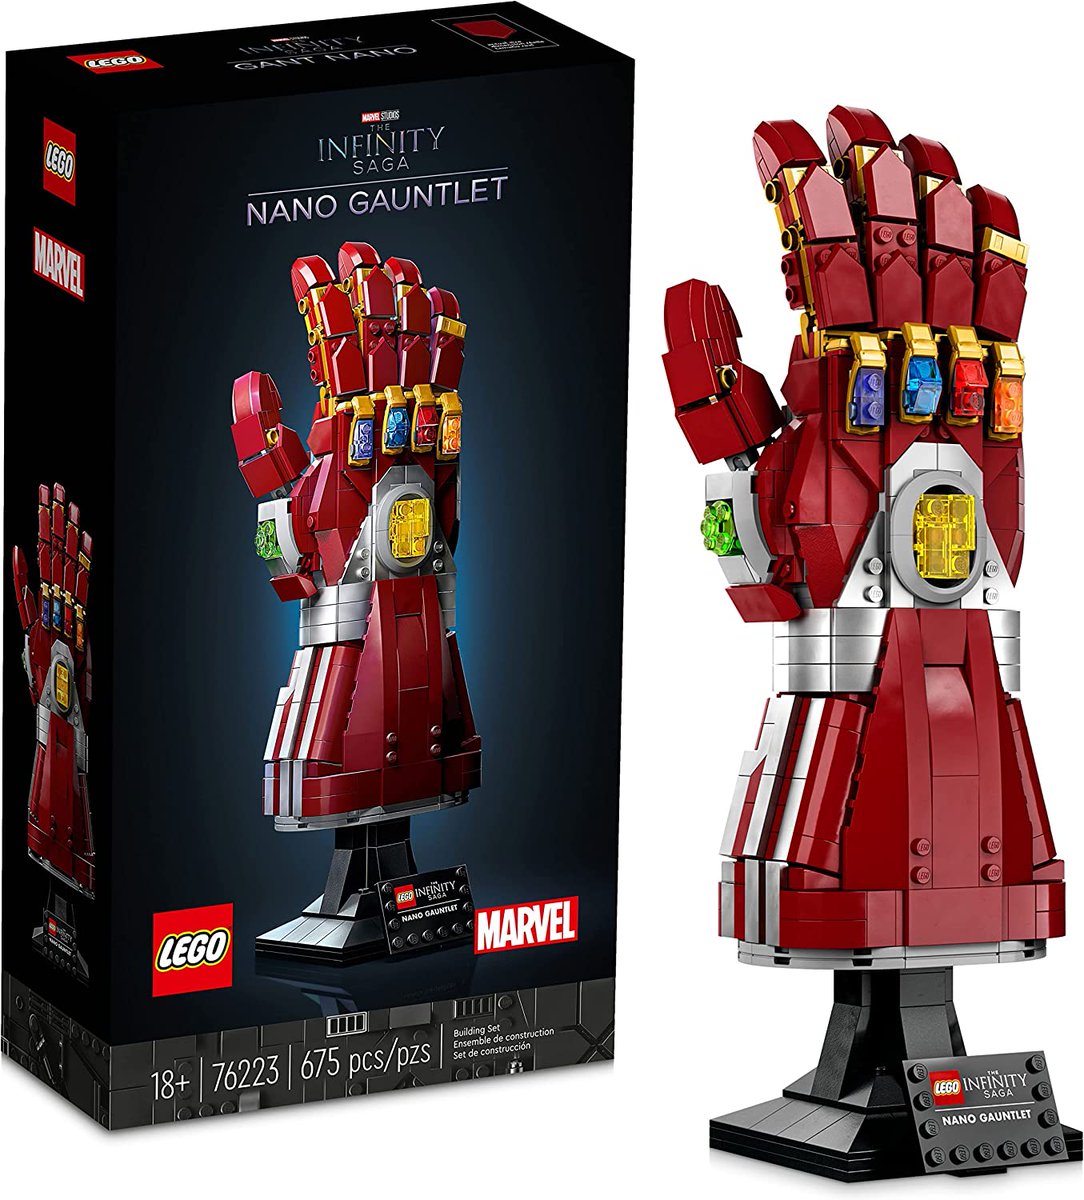 LEGO Marvel Nano Gauntlet 76223 Collectible Building Set; Replica Iron Man Gauntlet Kit for Adult Fans and Model-Makers (680 Pieces) ON SALE NOW: amzn.to/3BbVFS9 #LEGO #Marvel #IronMan #InfinityGauntlet